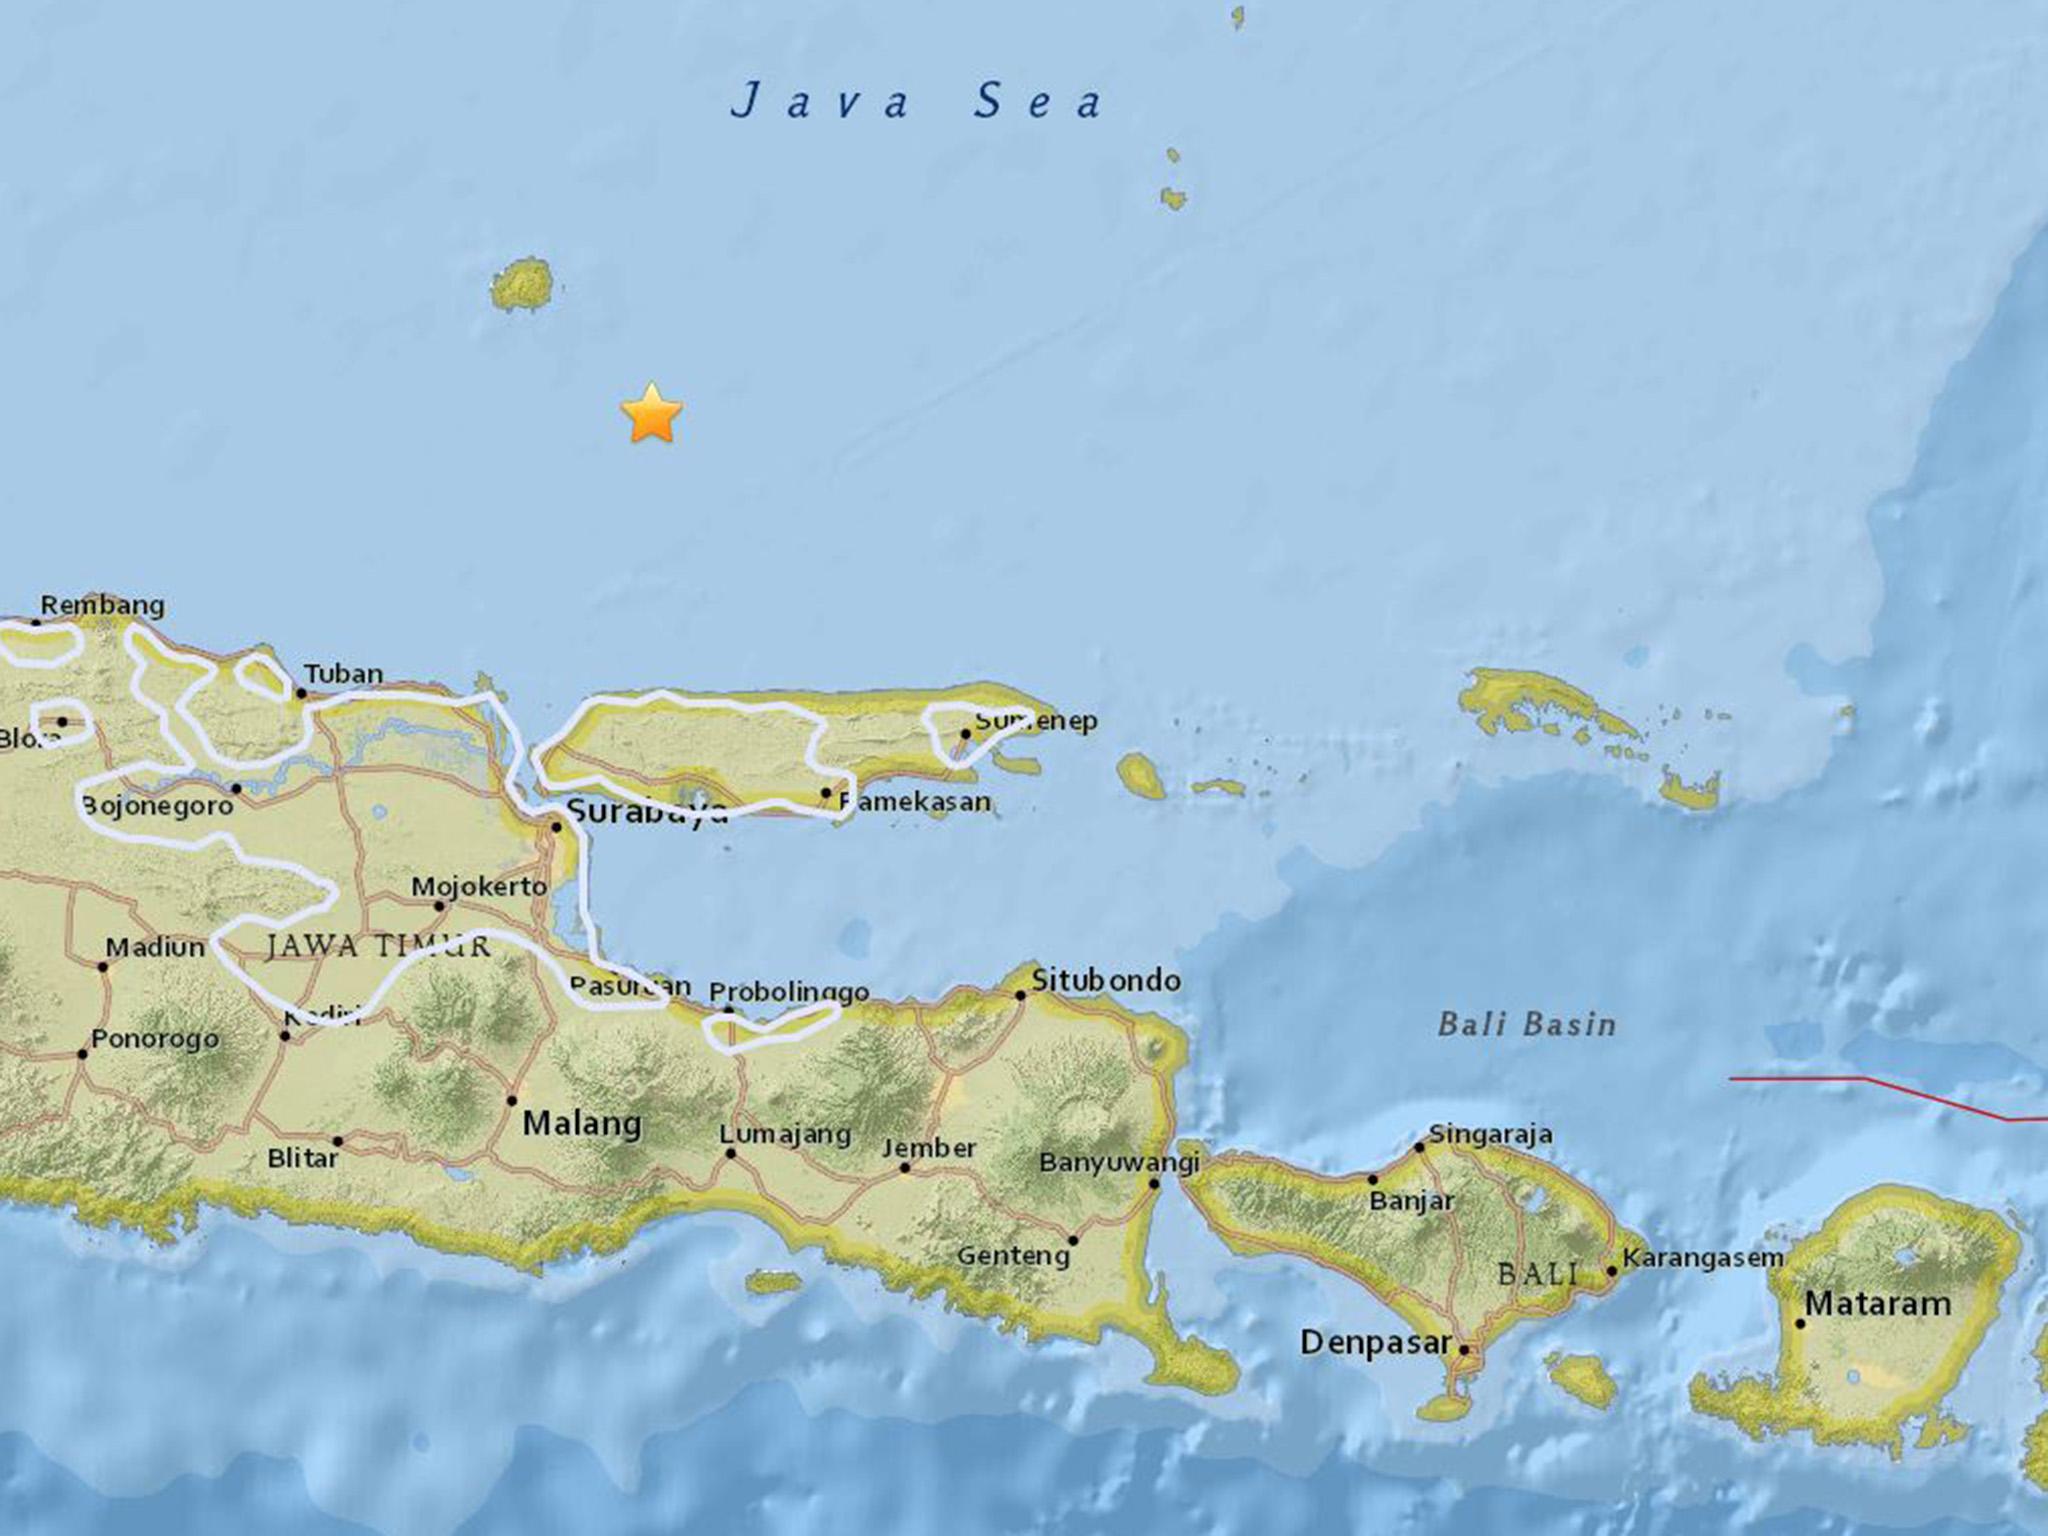 The location of the overnight earthquake in the Java Sea